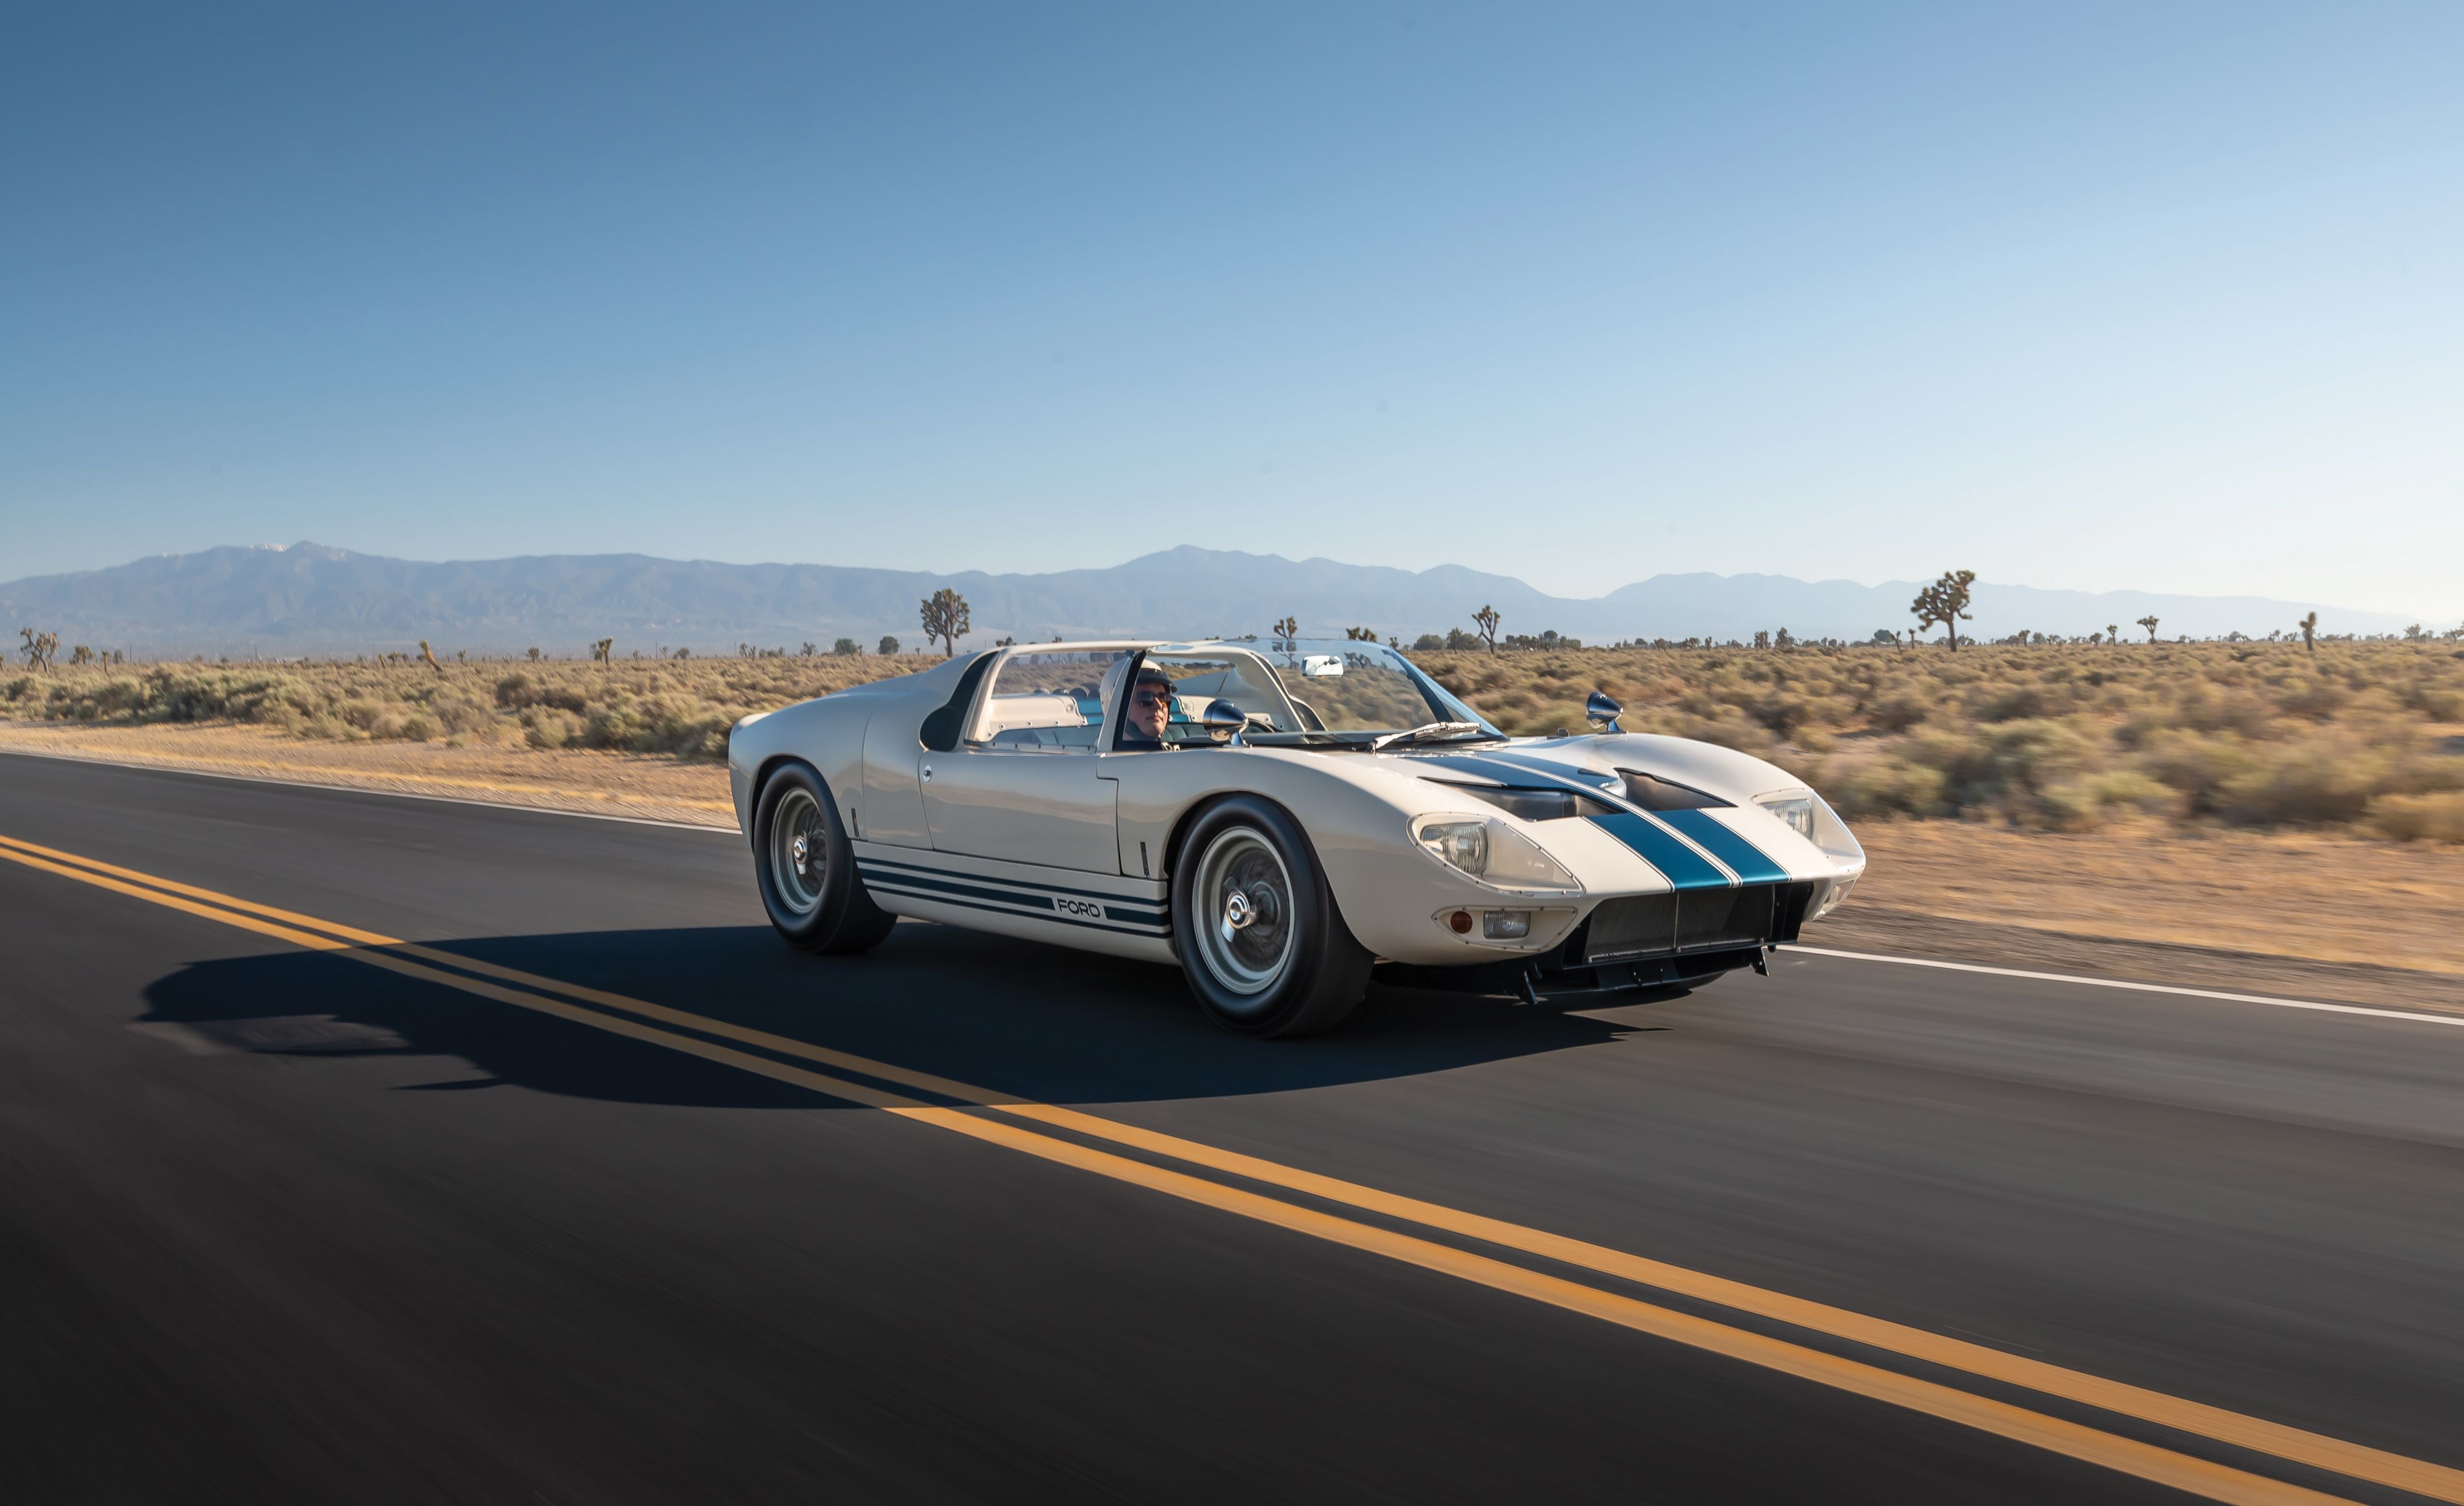 54 Years After We Drove This Ford Gt40 Roadster, It'S Being Auctioned For  Millions